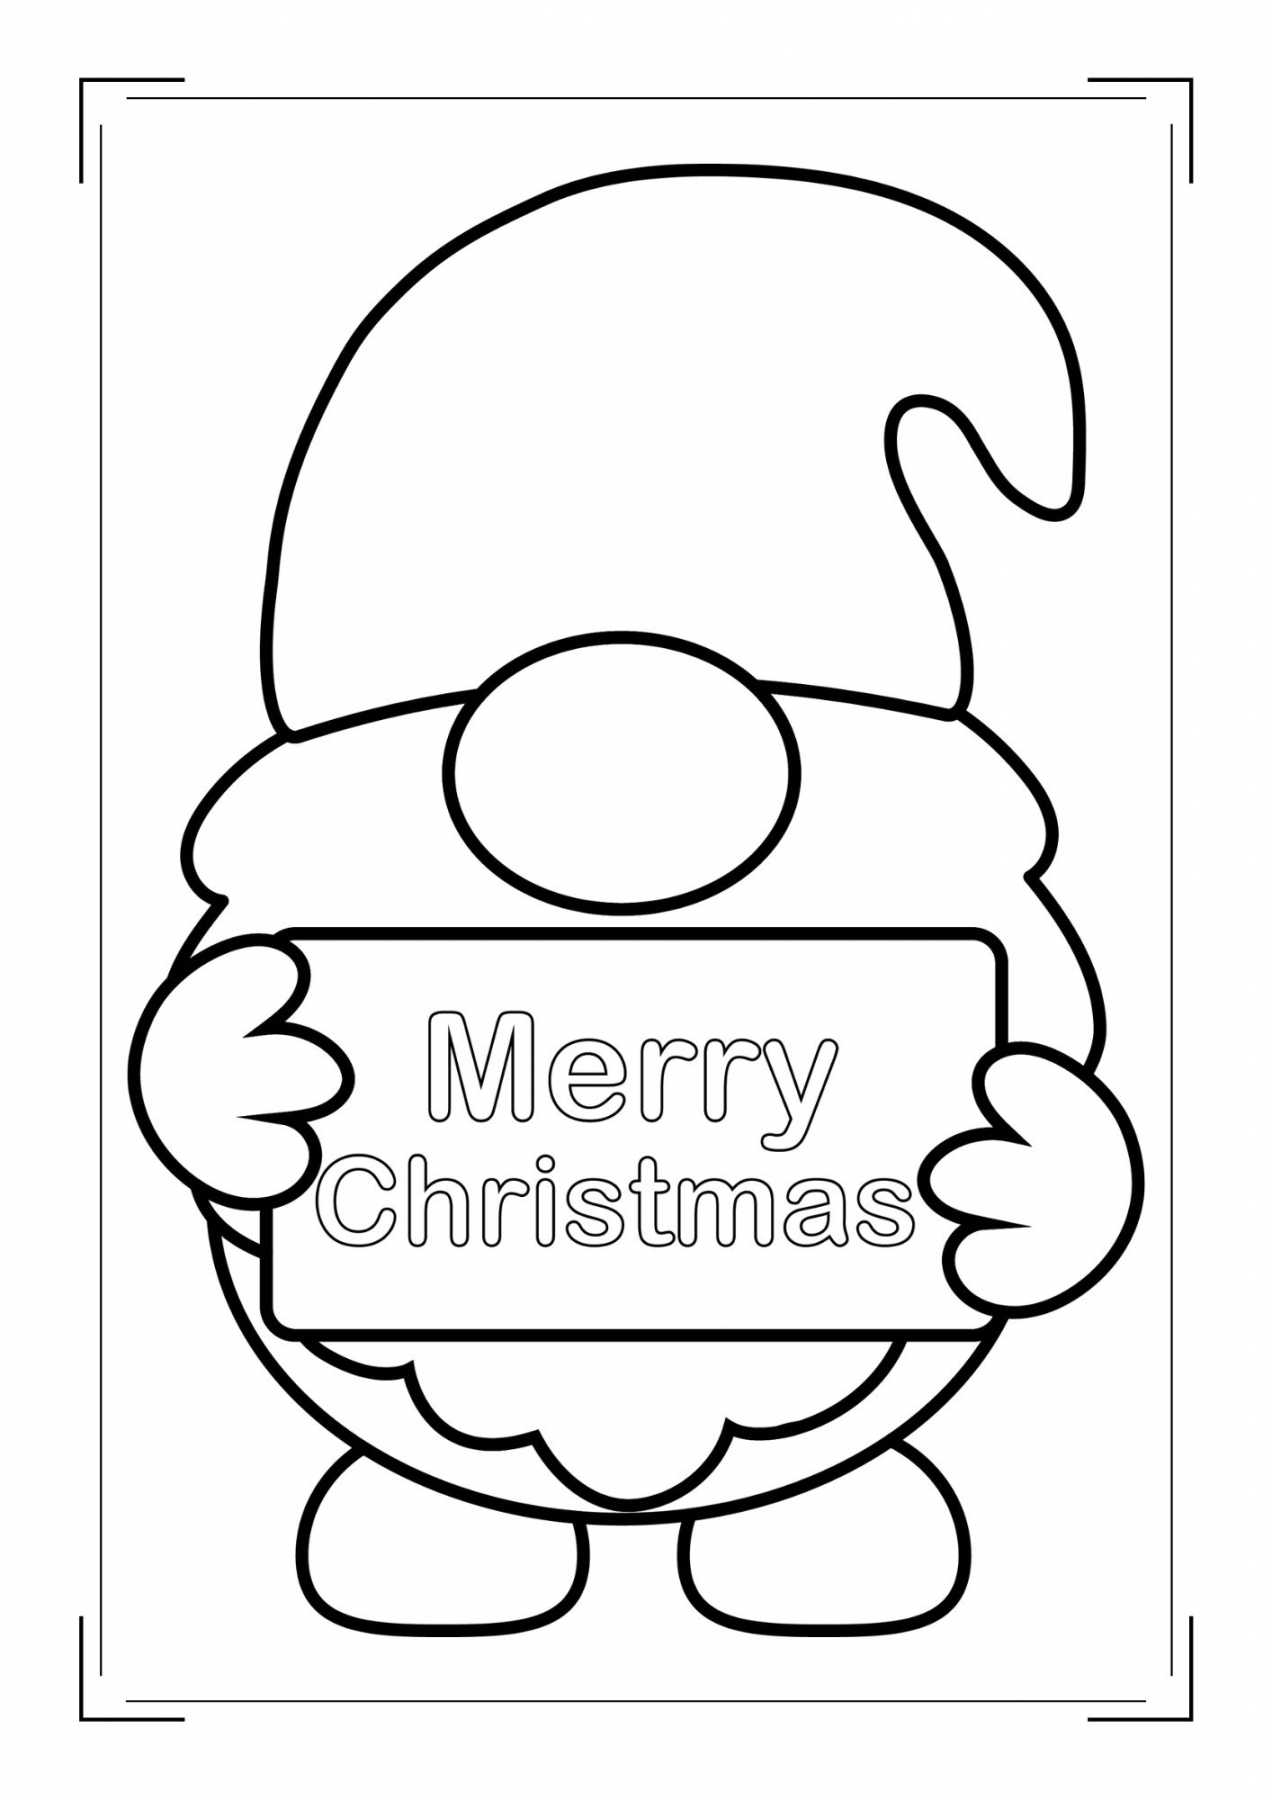 Free Christmas Gnome Coloring Book - So Stinking Cute! - FREE Printables - Free Printable Christmas Gnome Coloring Page